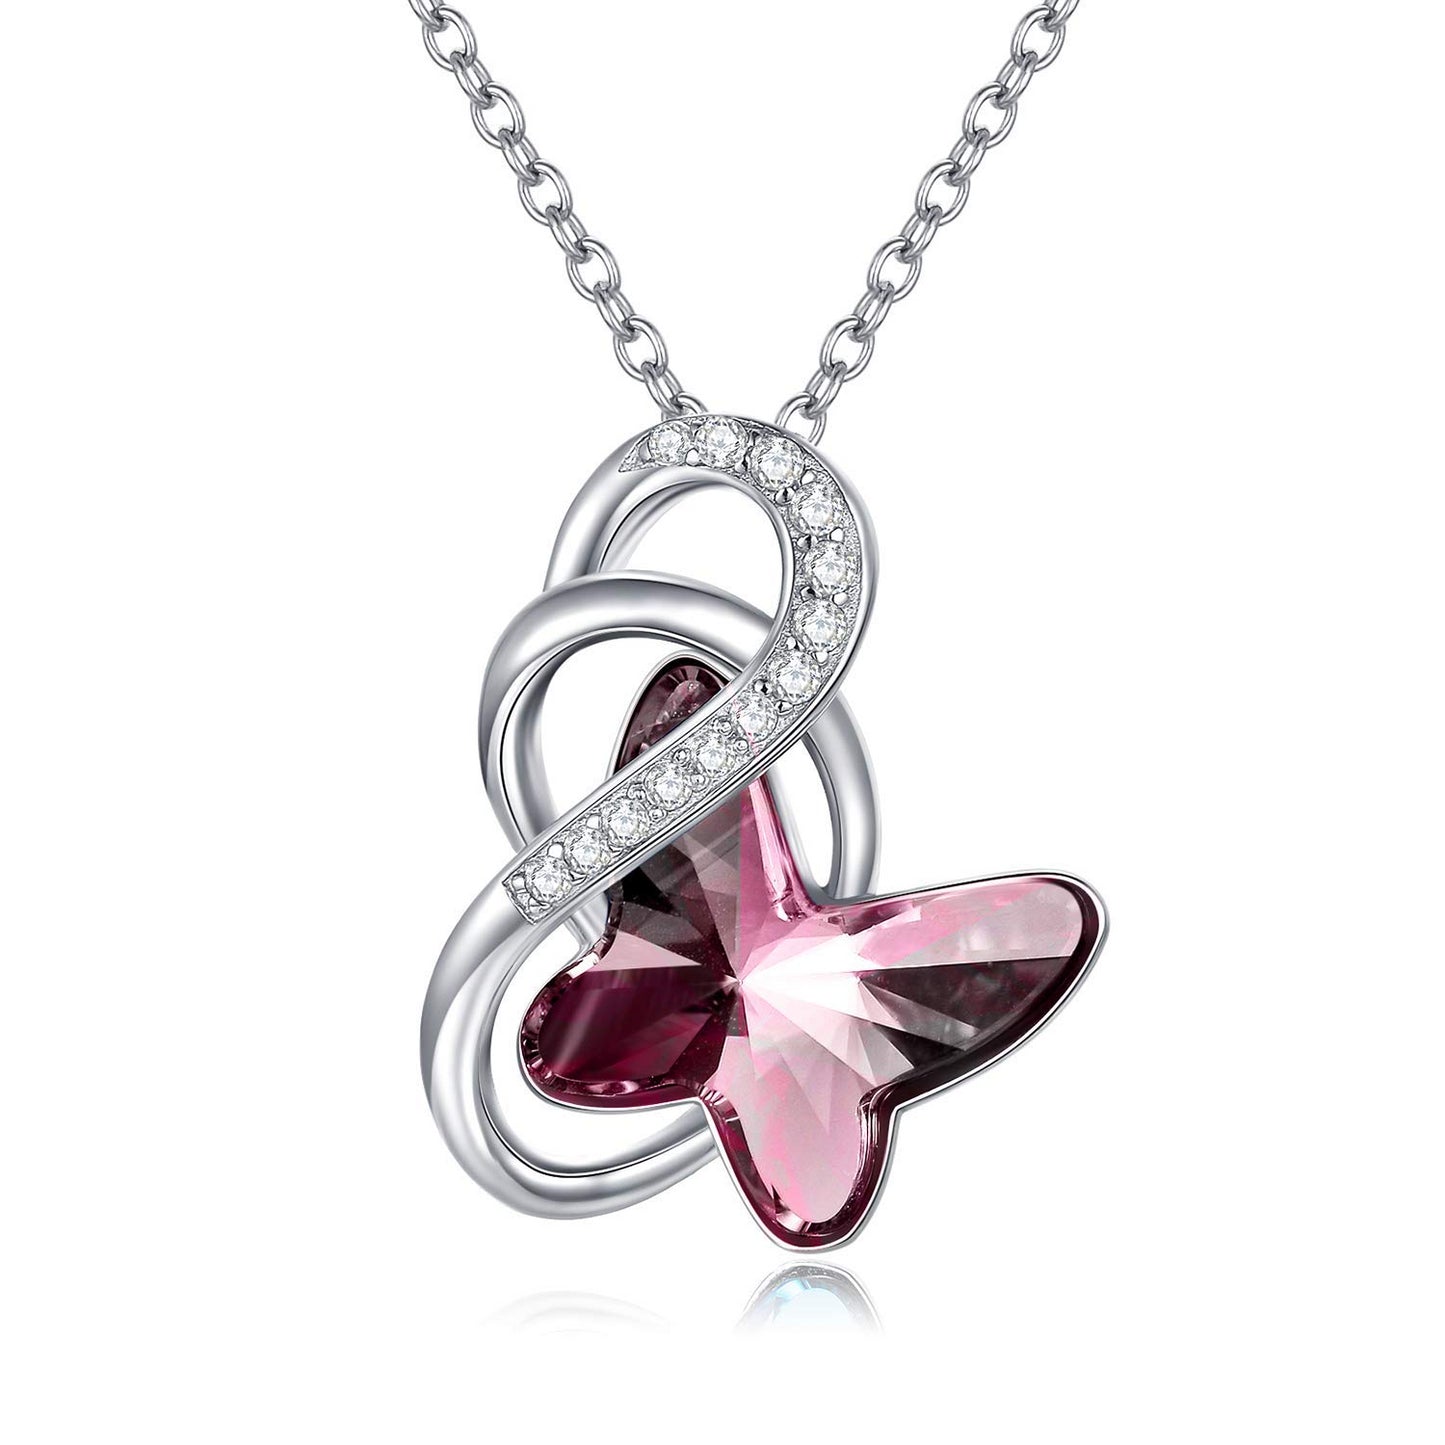 Sterling Silver Infinity Butterfly Pendant with Crystal For Women